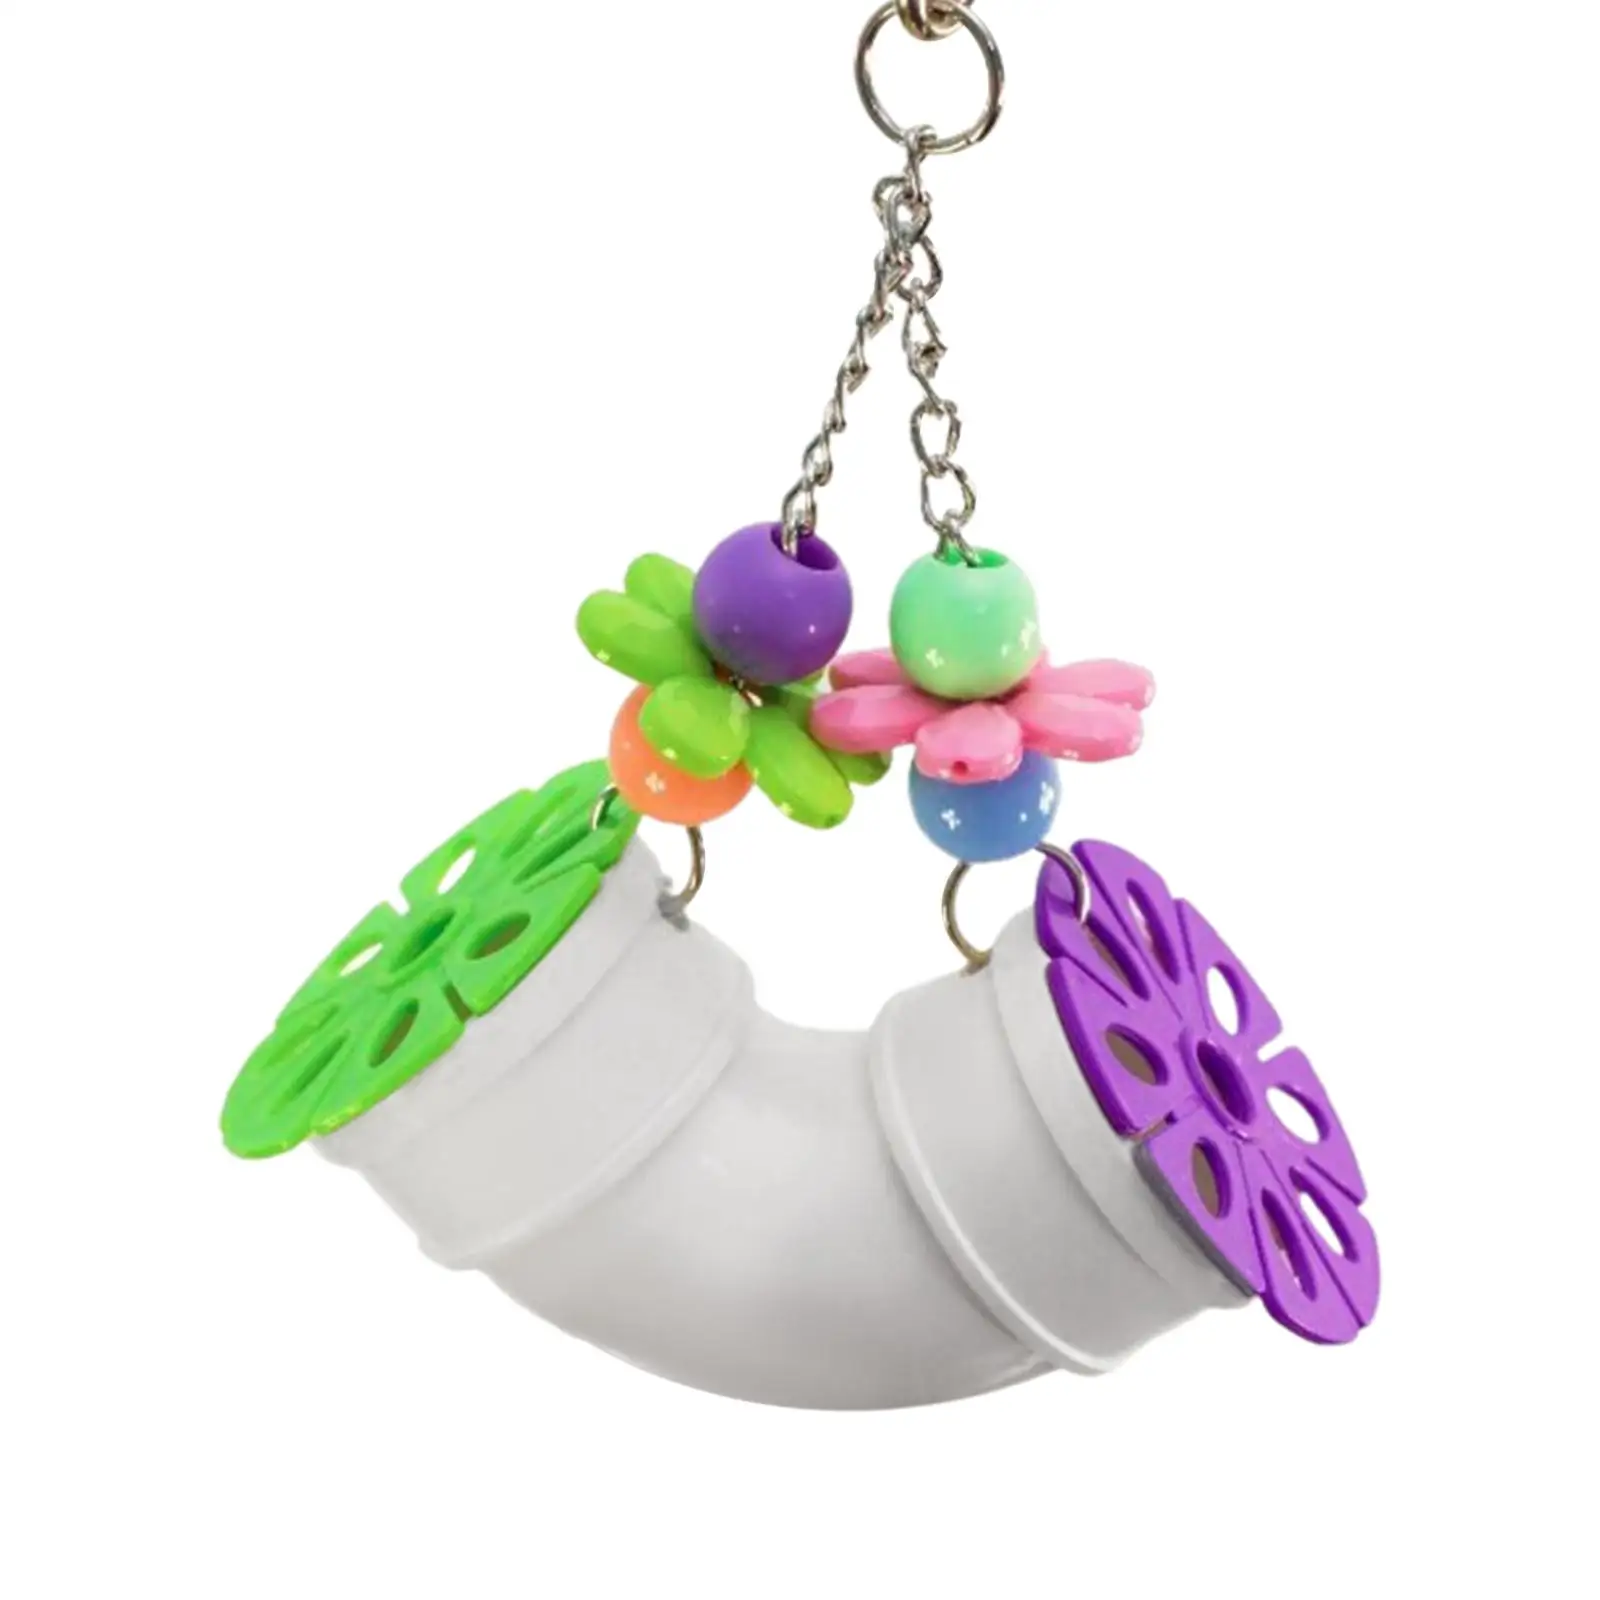 Parrot Toys Pipeline Cage Bite Toy Bird Chewing Toy Cage Hanging Accessory for Cockatoos Cockatiels Budgies Lovebird Parrot Gift